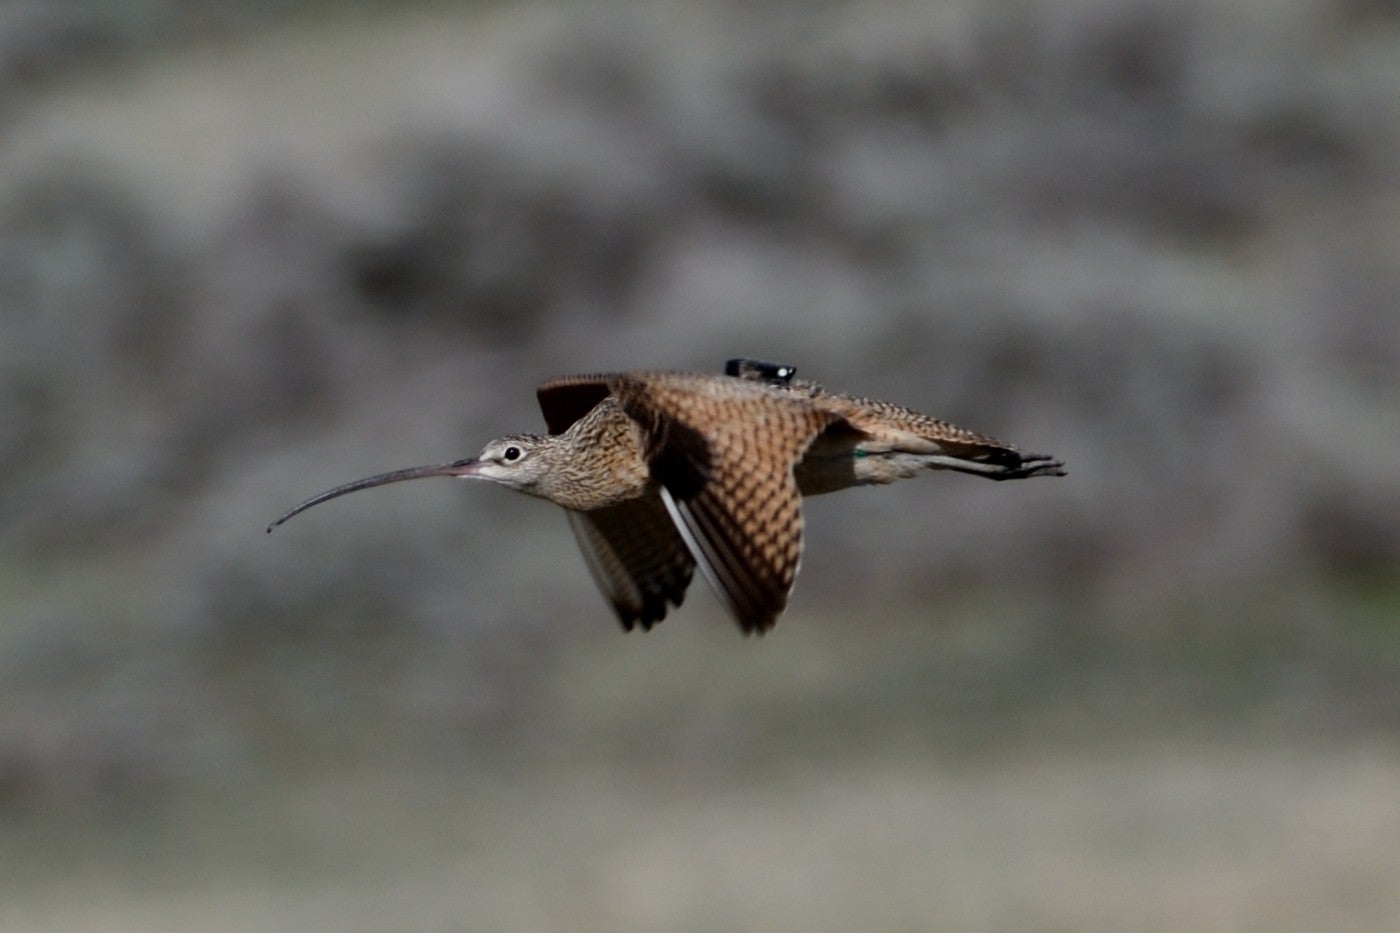 A long-billed curlew bird in flight with a GPS tracking tag on its back